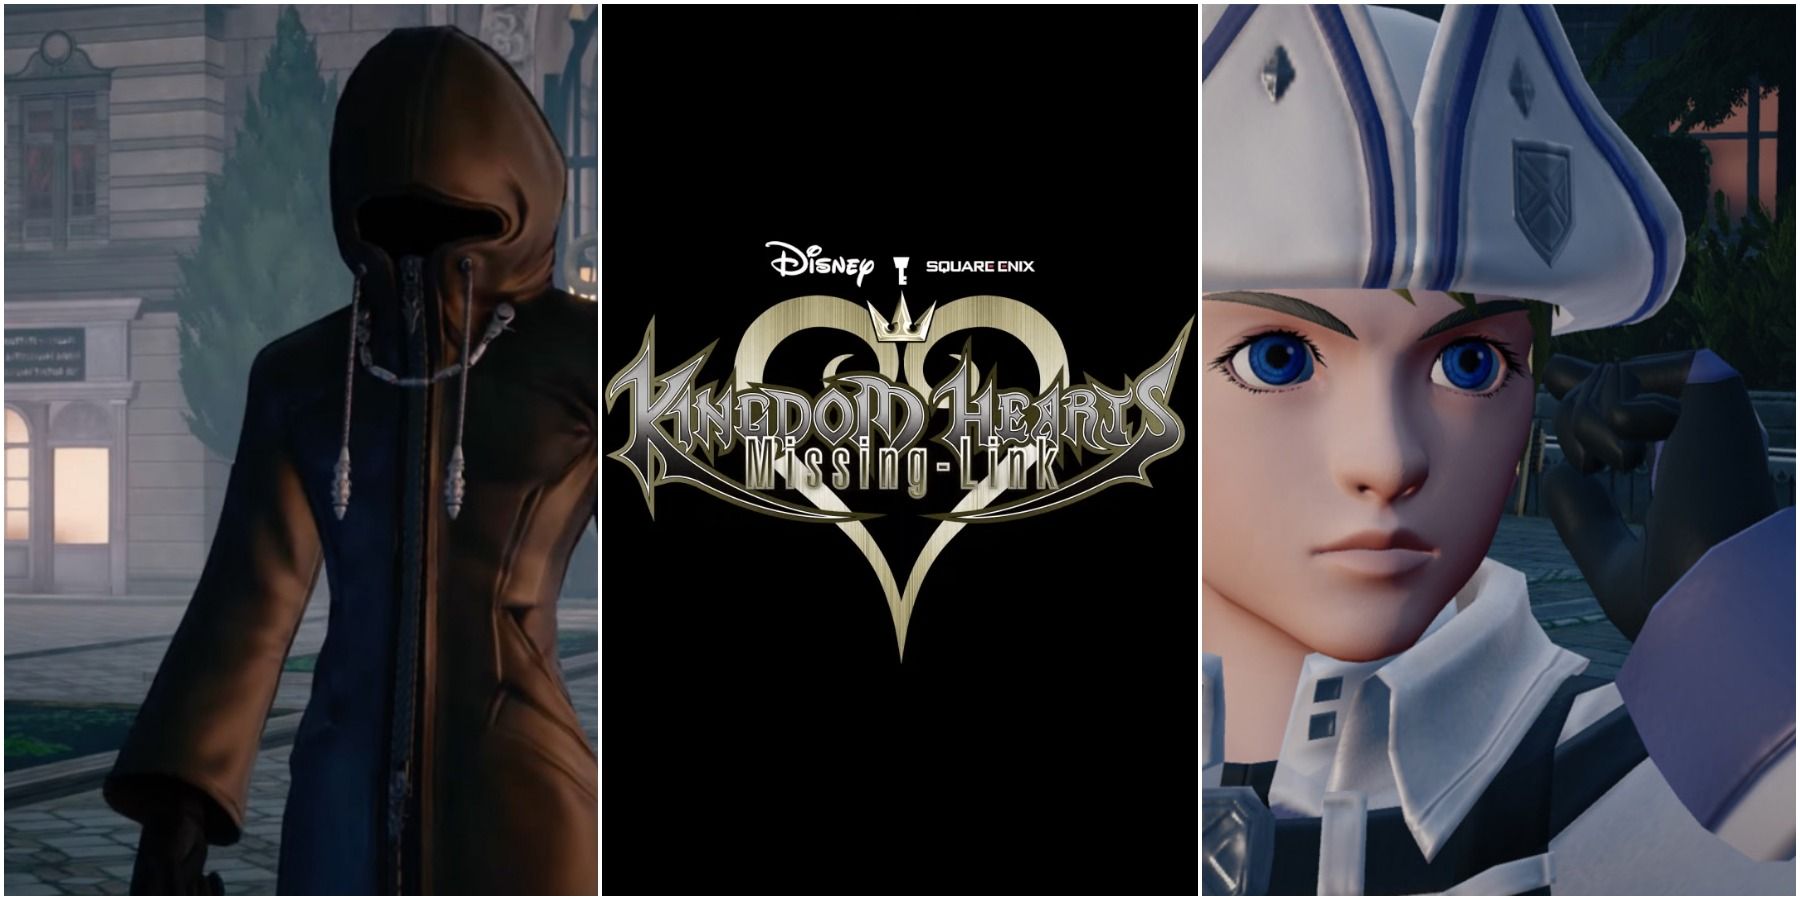 Kingdom Hearts: Missing Link Character Customization Detailed